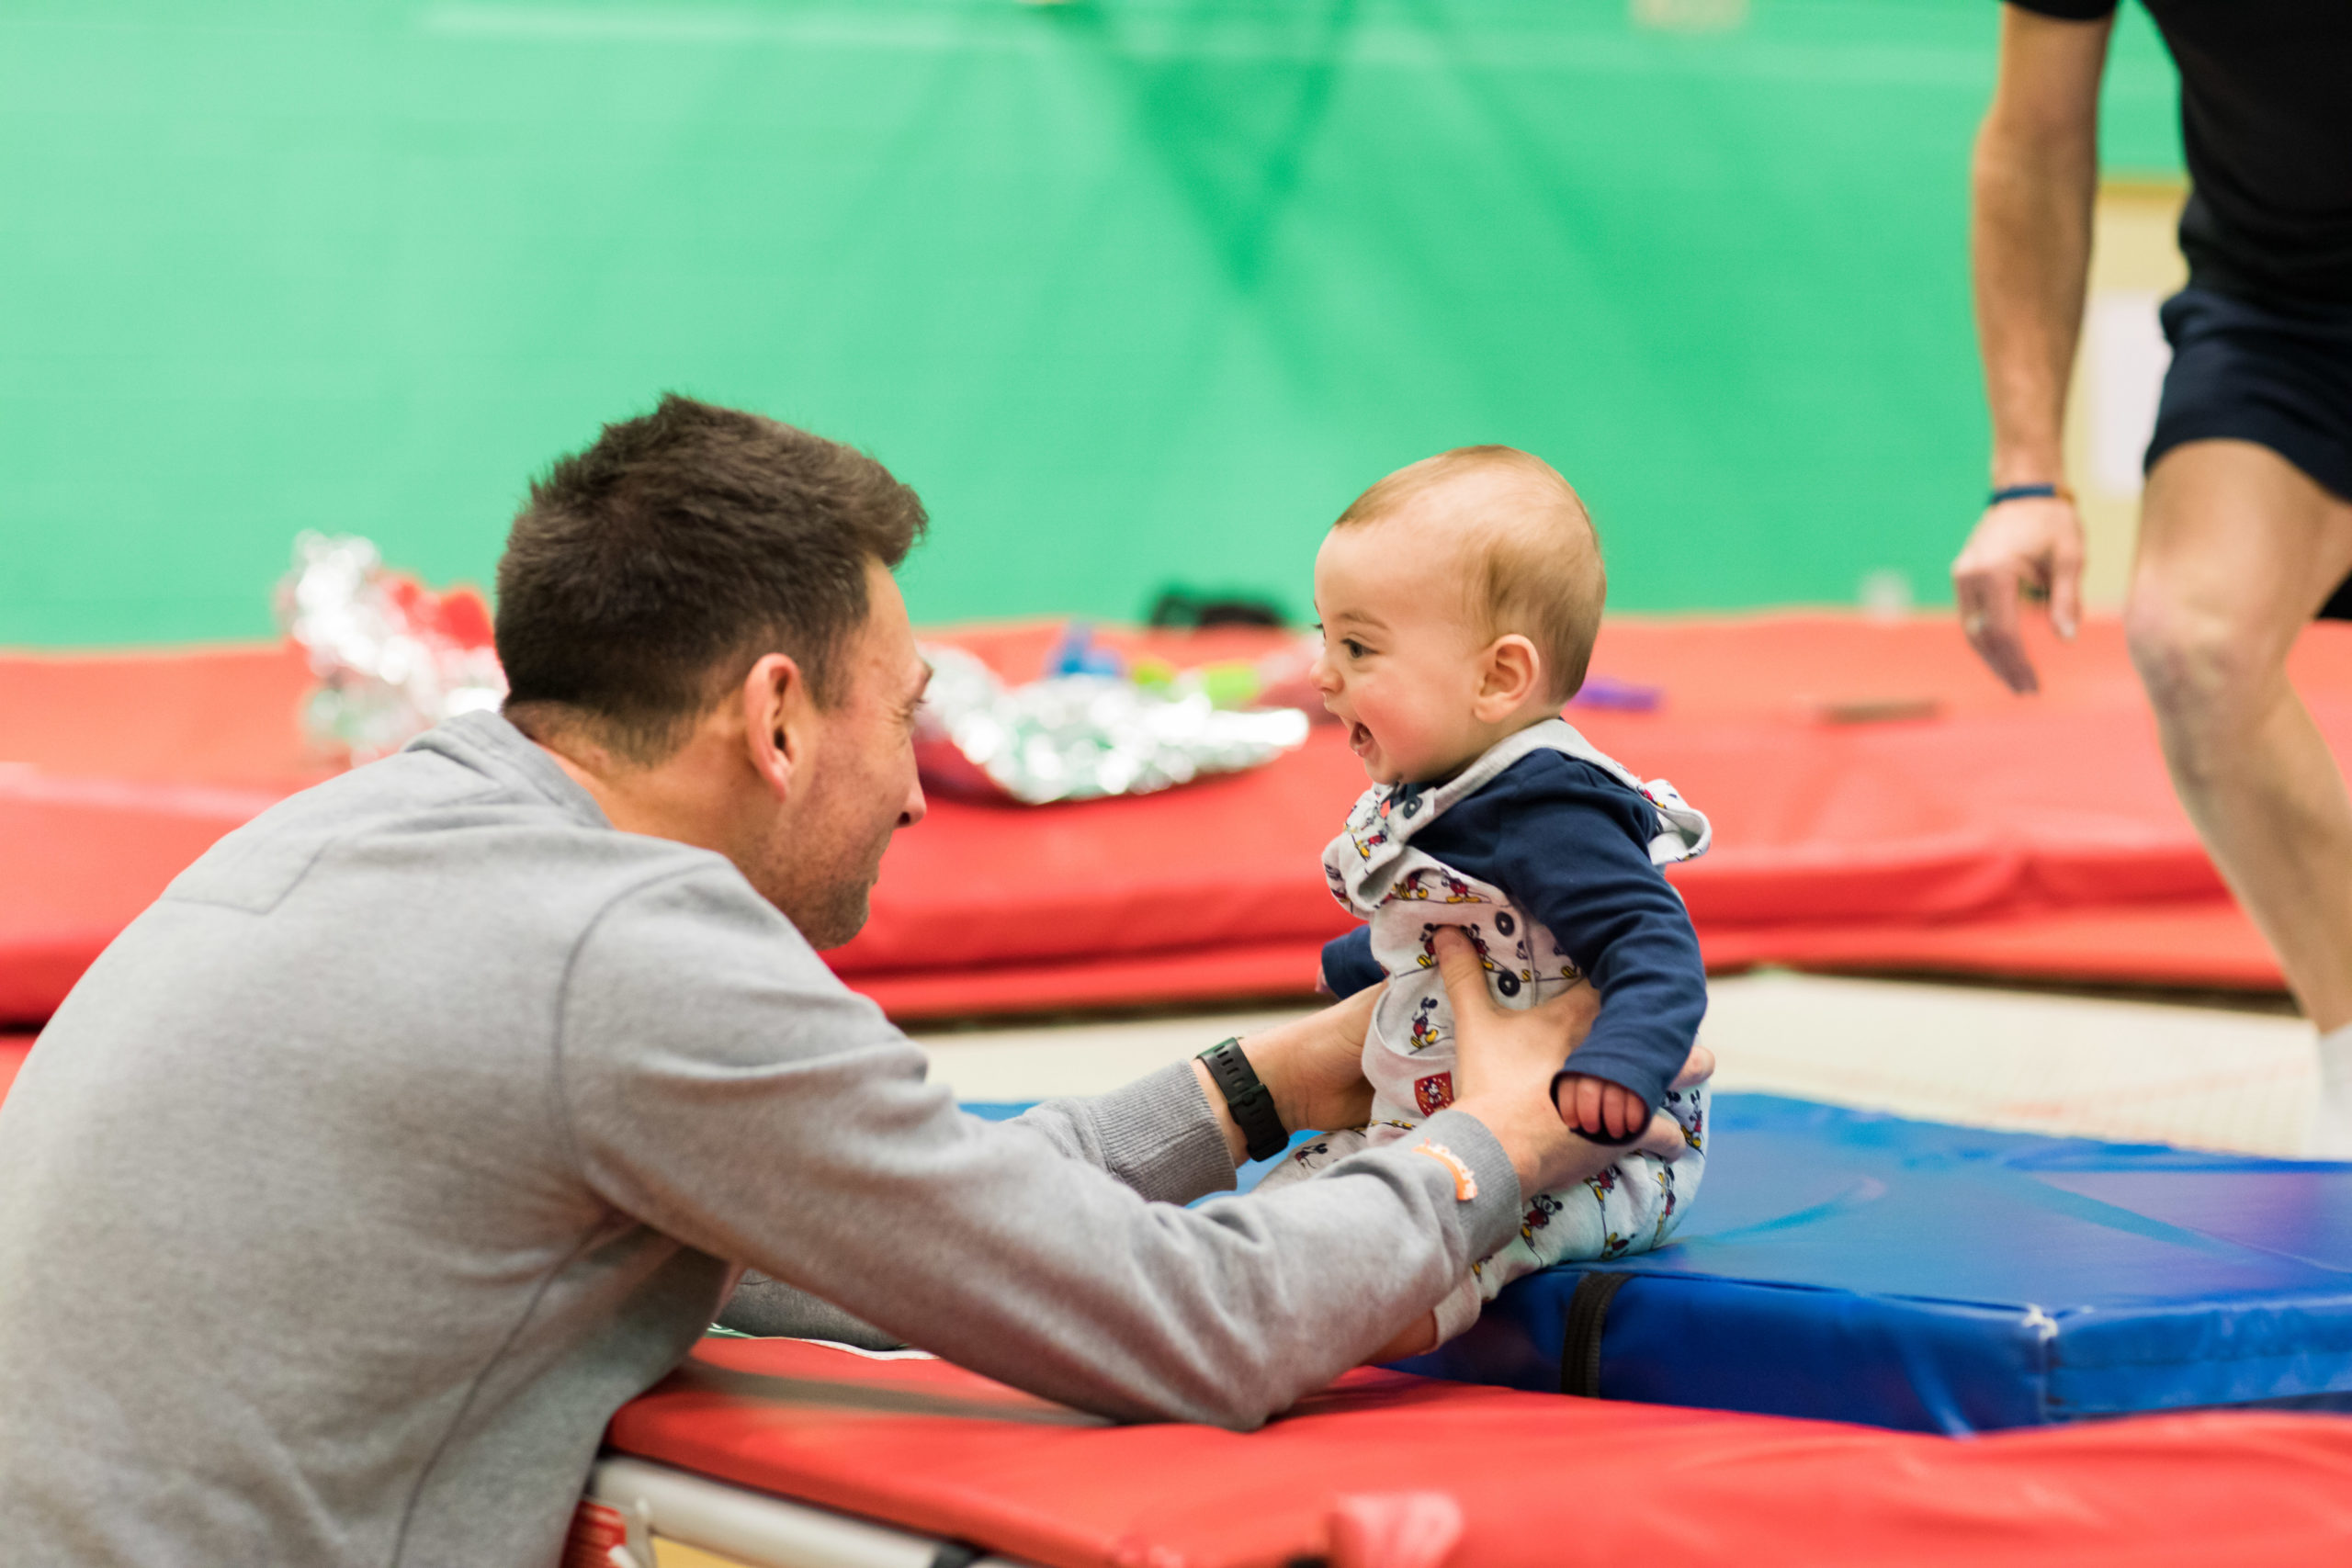 HemiHelp event - adult holding baby, baby is sitting on trampoline